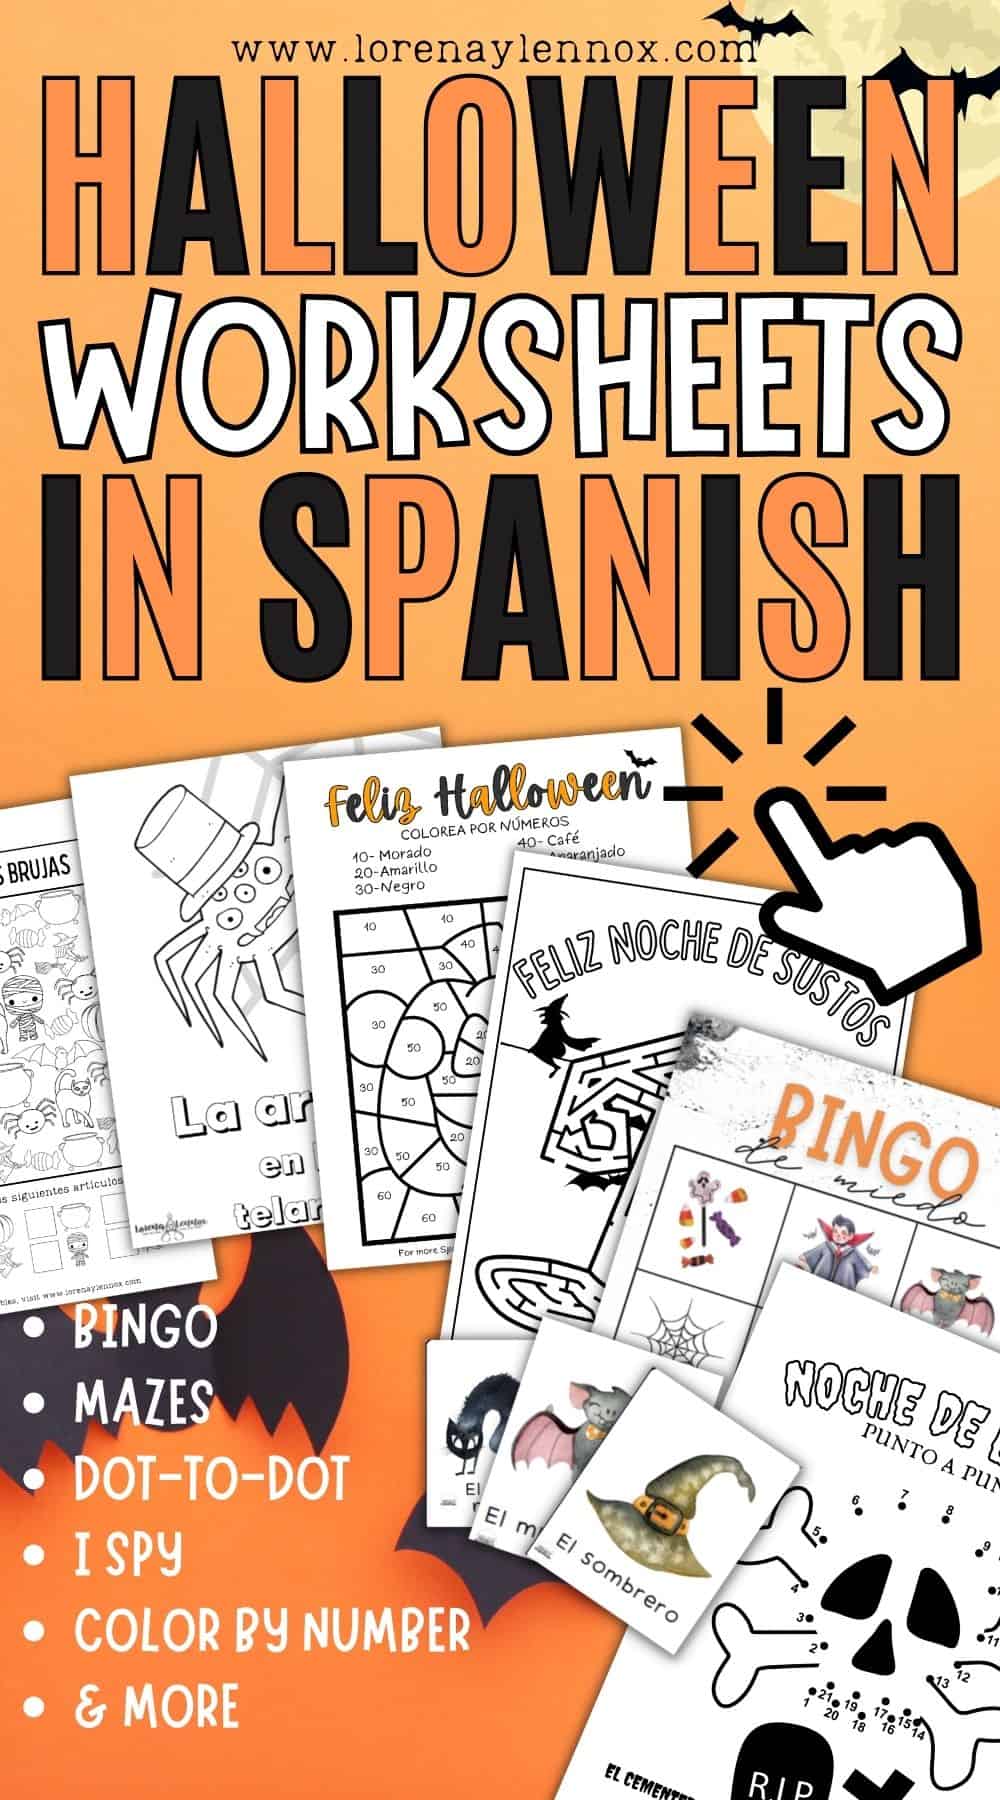 "Unleash the magic of Halloween in your Spanish lessons with our collection of 13+ captivating Spanish Halloween worksheets. From coloring pages to scavenger hunts, these printables are perfect for classrooms and homes alike. Elevate language learning while embracing the holiday spirit! 🎃📚🇪🇸 #SpanishHalloweenWorksheets #BilingualLearning #HalloweenInSpanish"